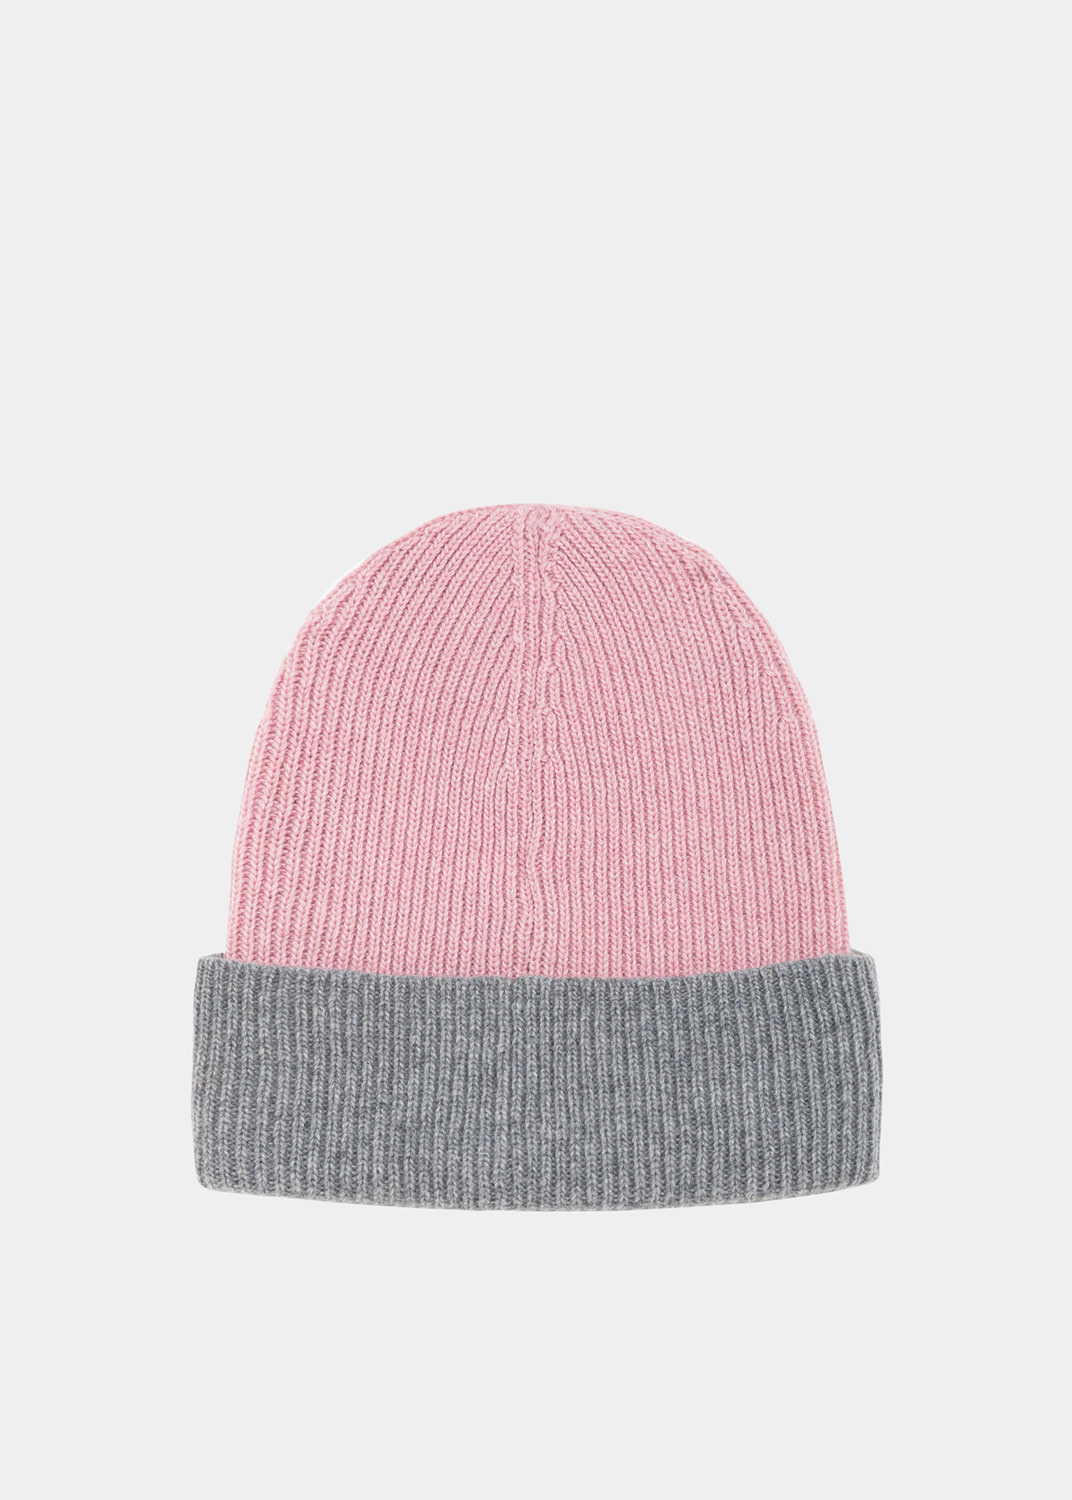 D.A.T.E.: BETTO WOOL GREY-PINK